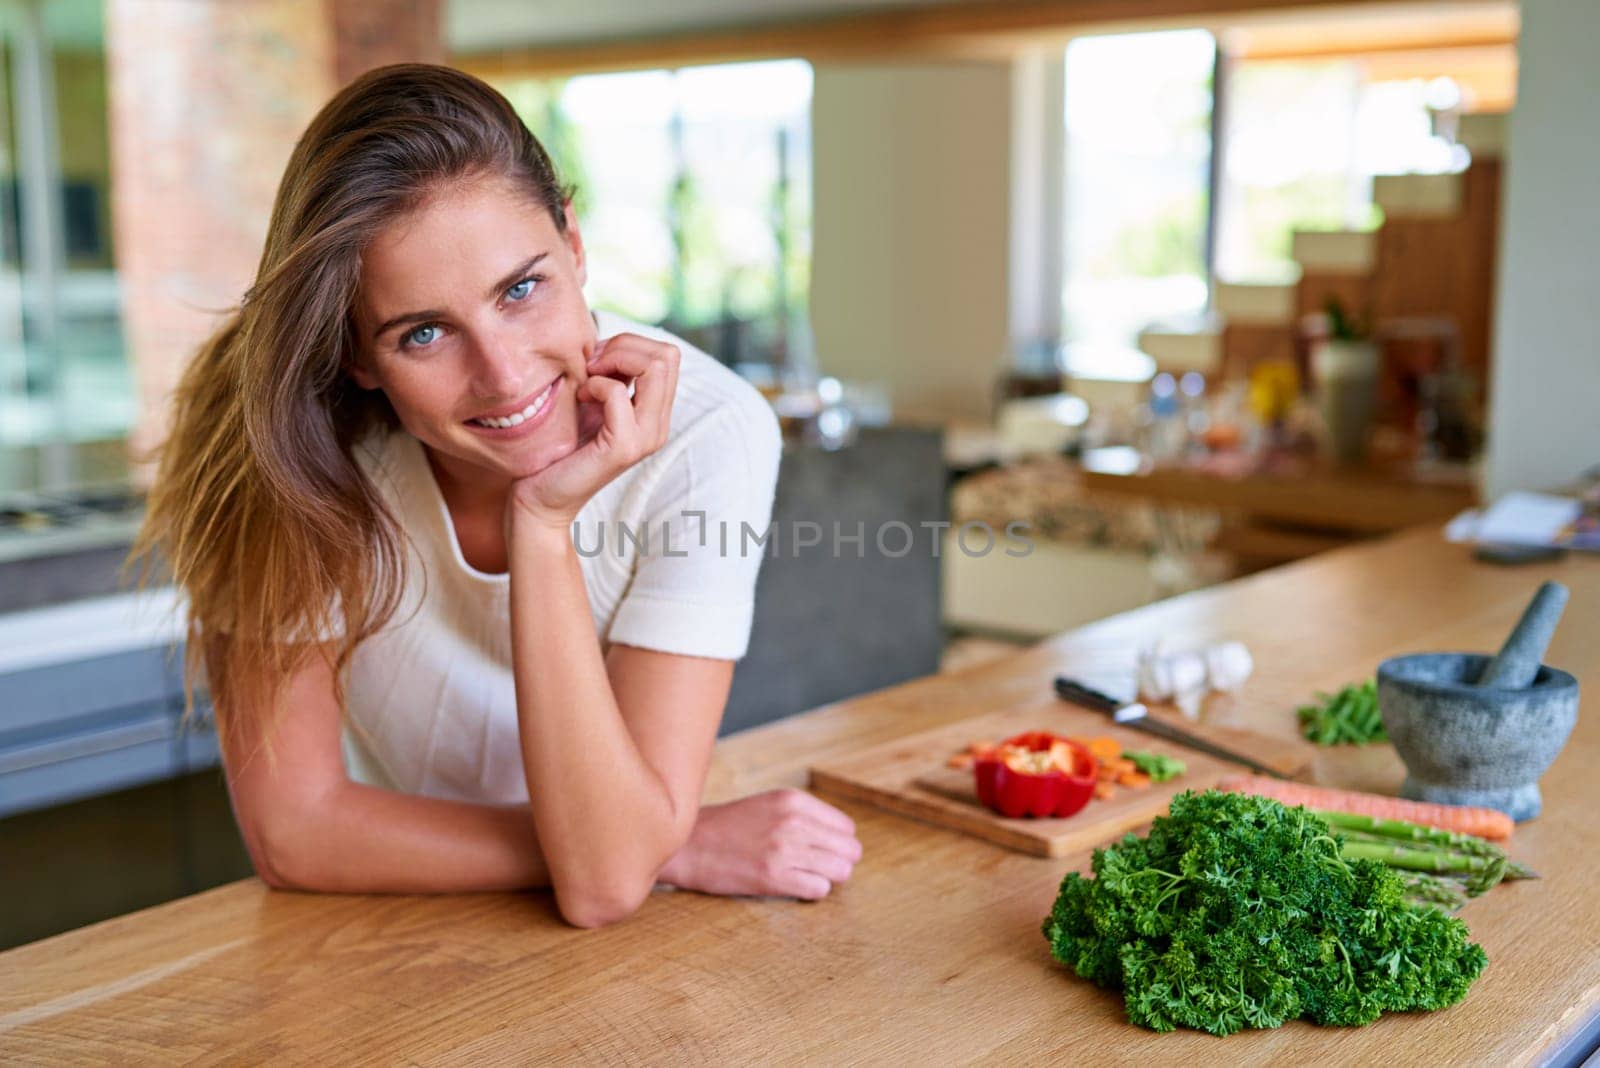 Portrait, kitchen and woman with vegetables, smile and organic ingredients with vegan, healthy meal and diet. Nutrition, vegetarian and person in home, food and chef with skills, cooking and wellness.